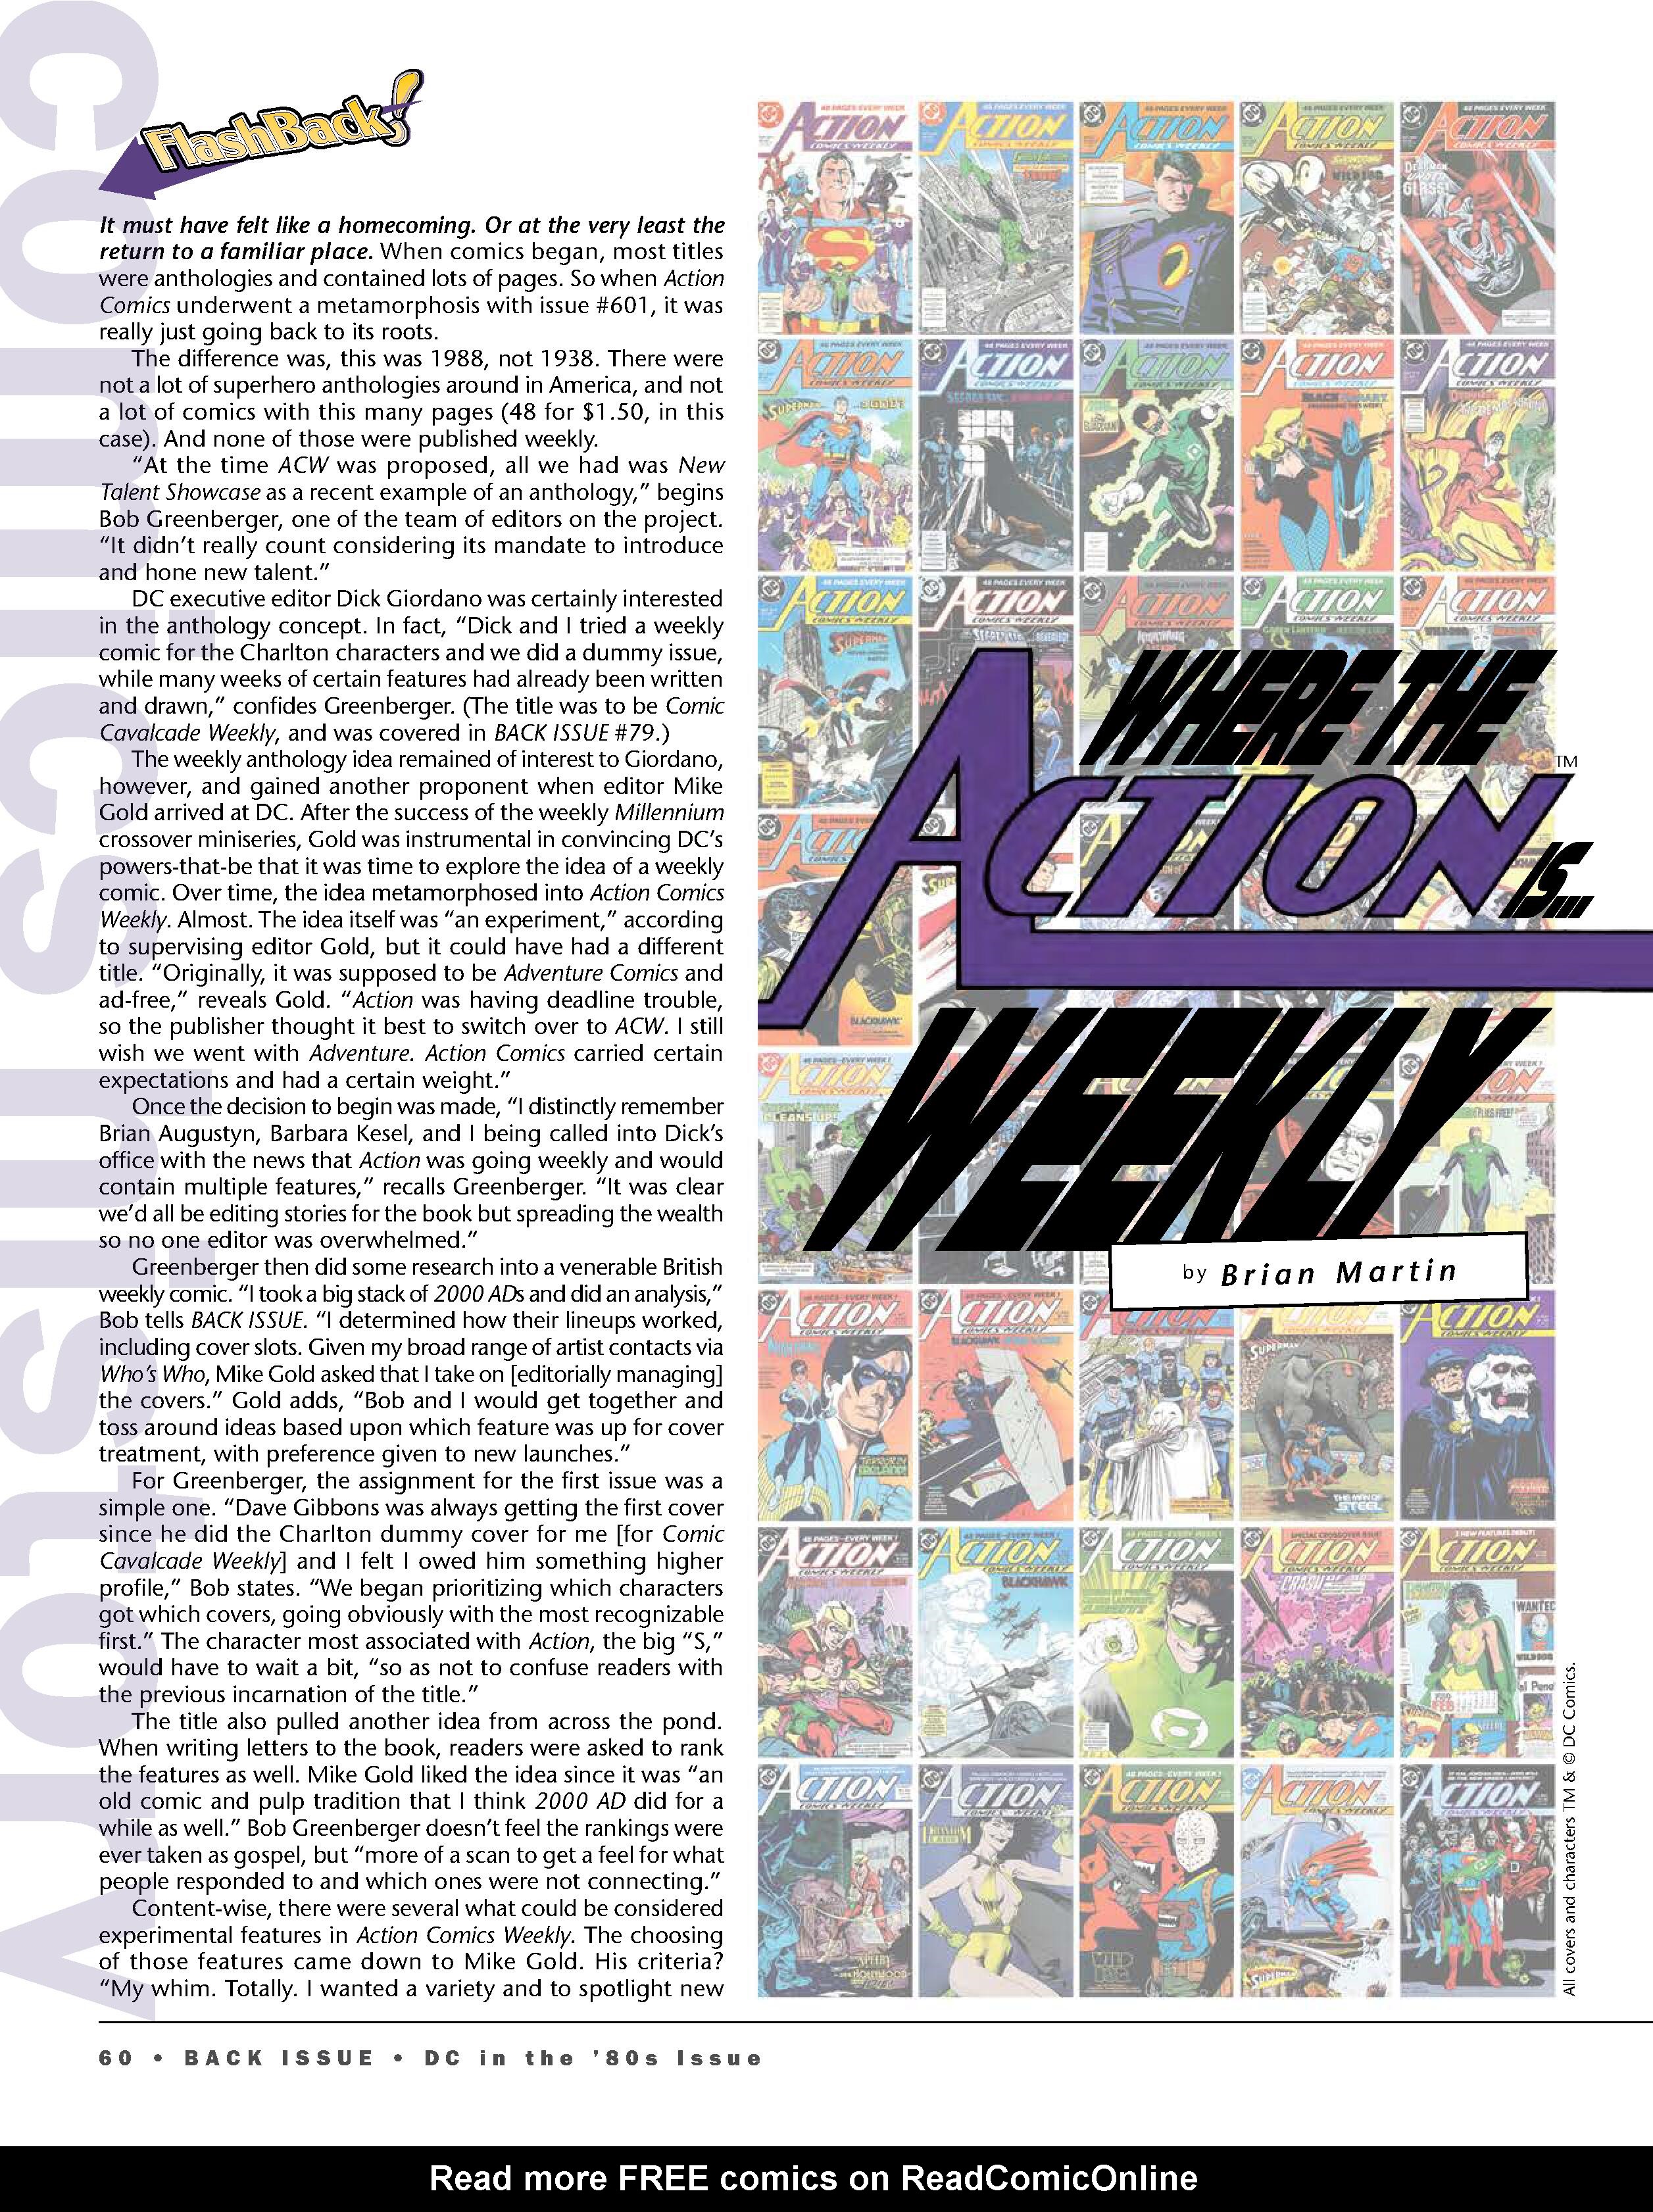 Read online Back Issue comic -  Issue #98 - 62